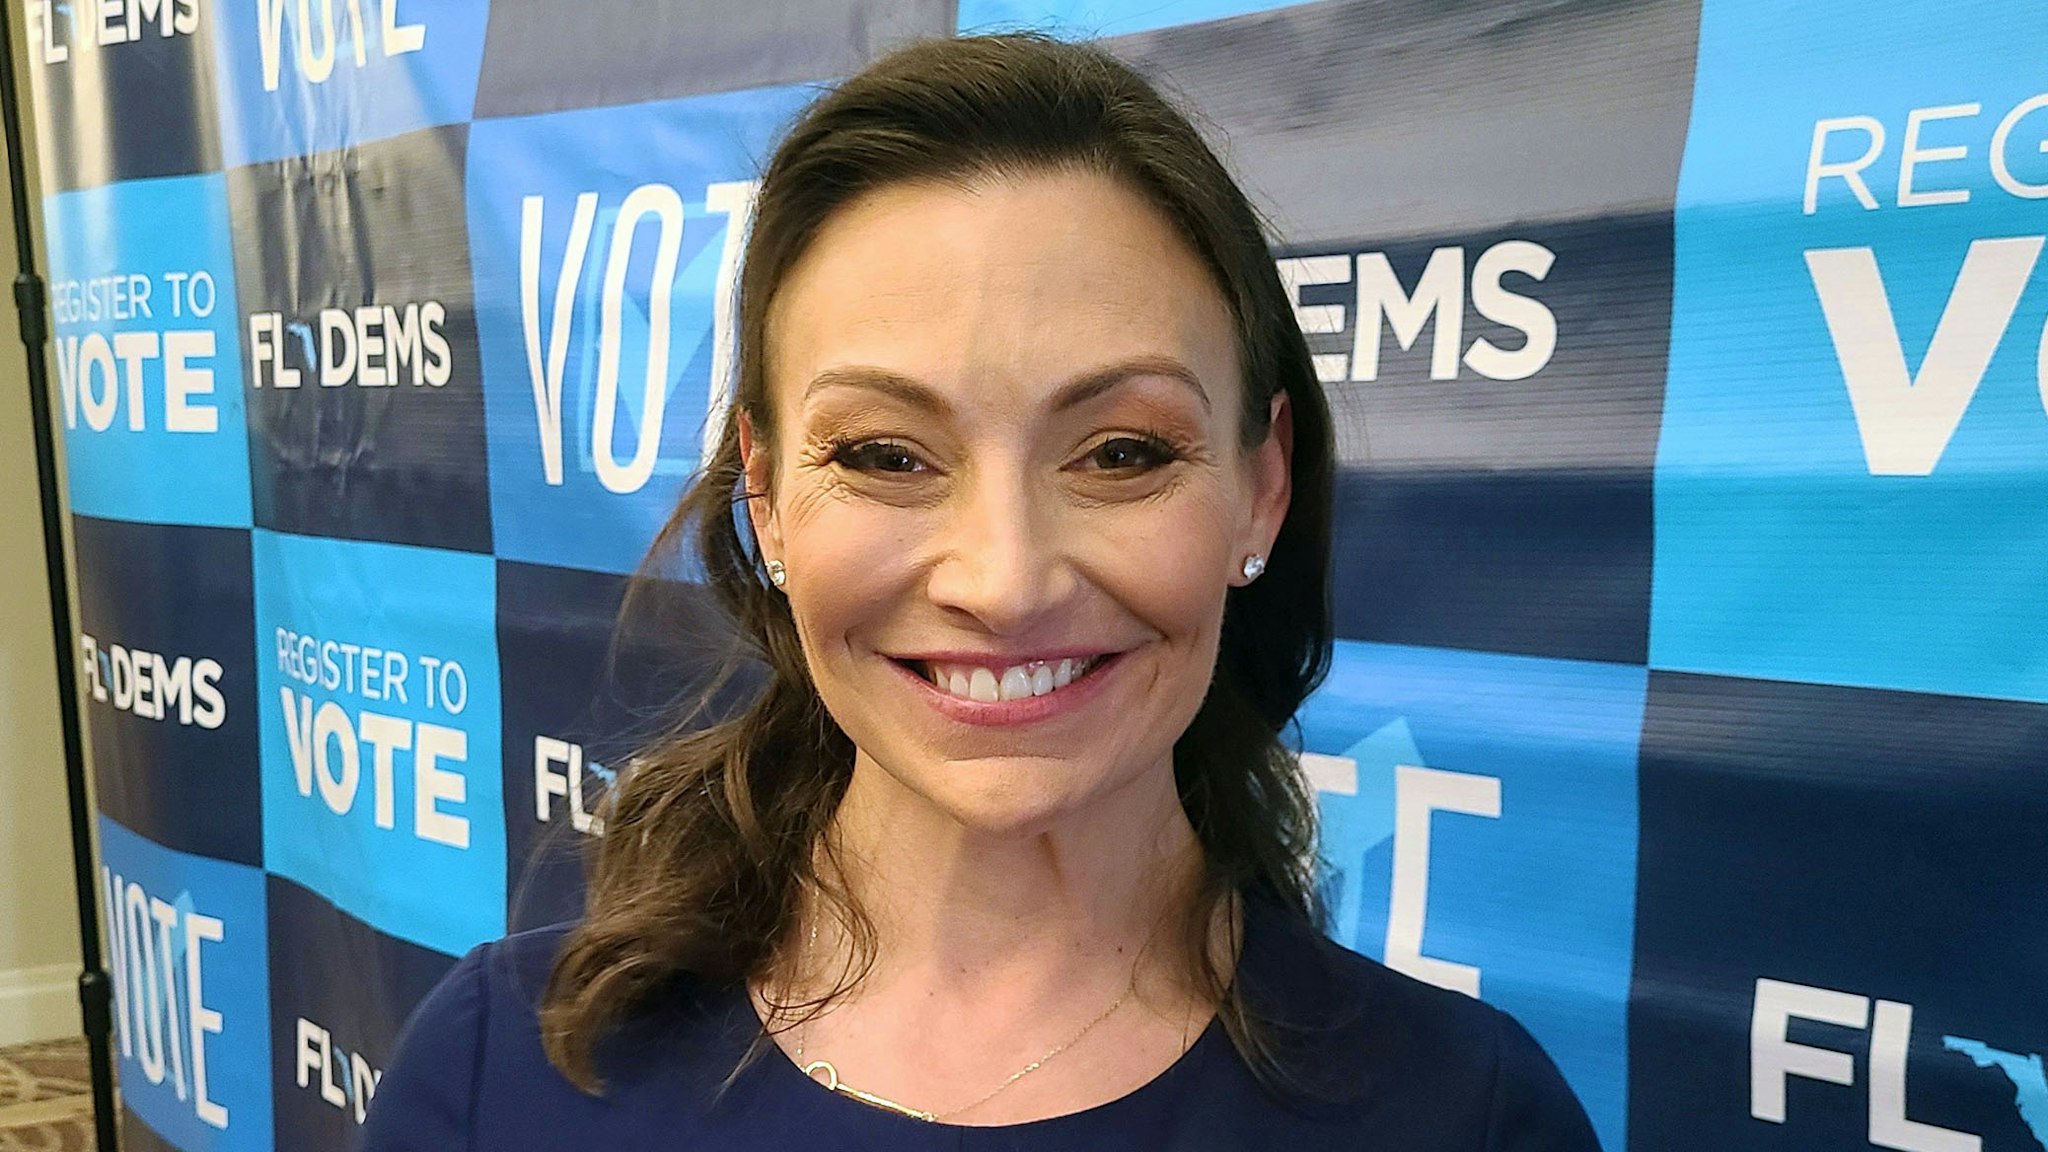 Former Agricultural Commissioner Nikki Fried was elected as chair of the Florida Democratic Party on Saturday, Feb. 25, 2023, beating former State Sen. Annette Taddeo, in Orlando, Florida.